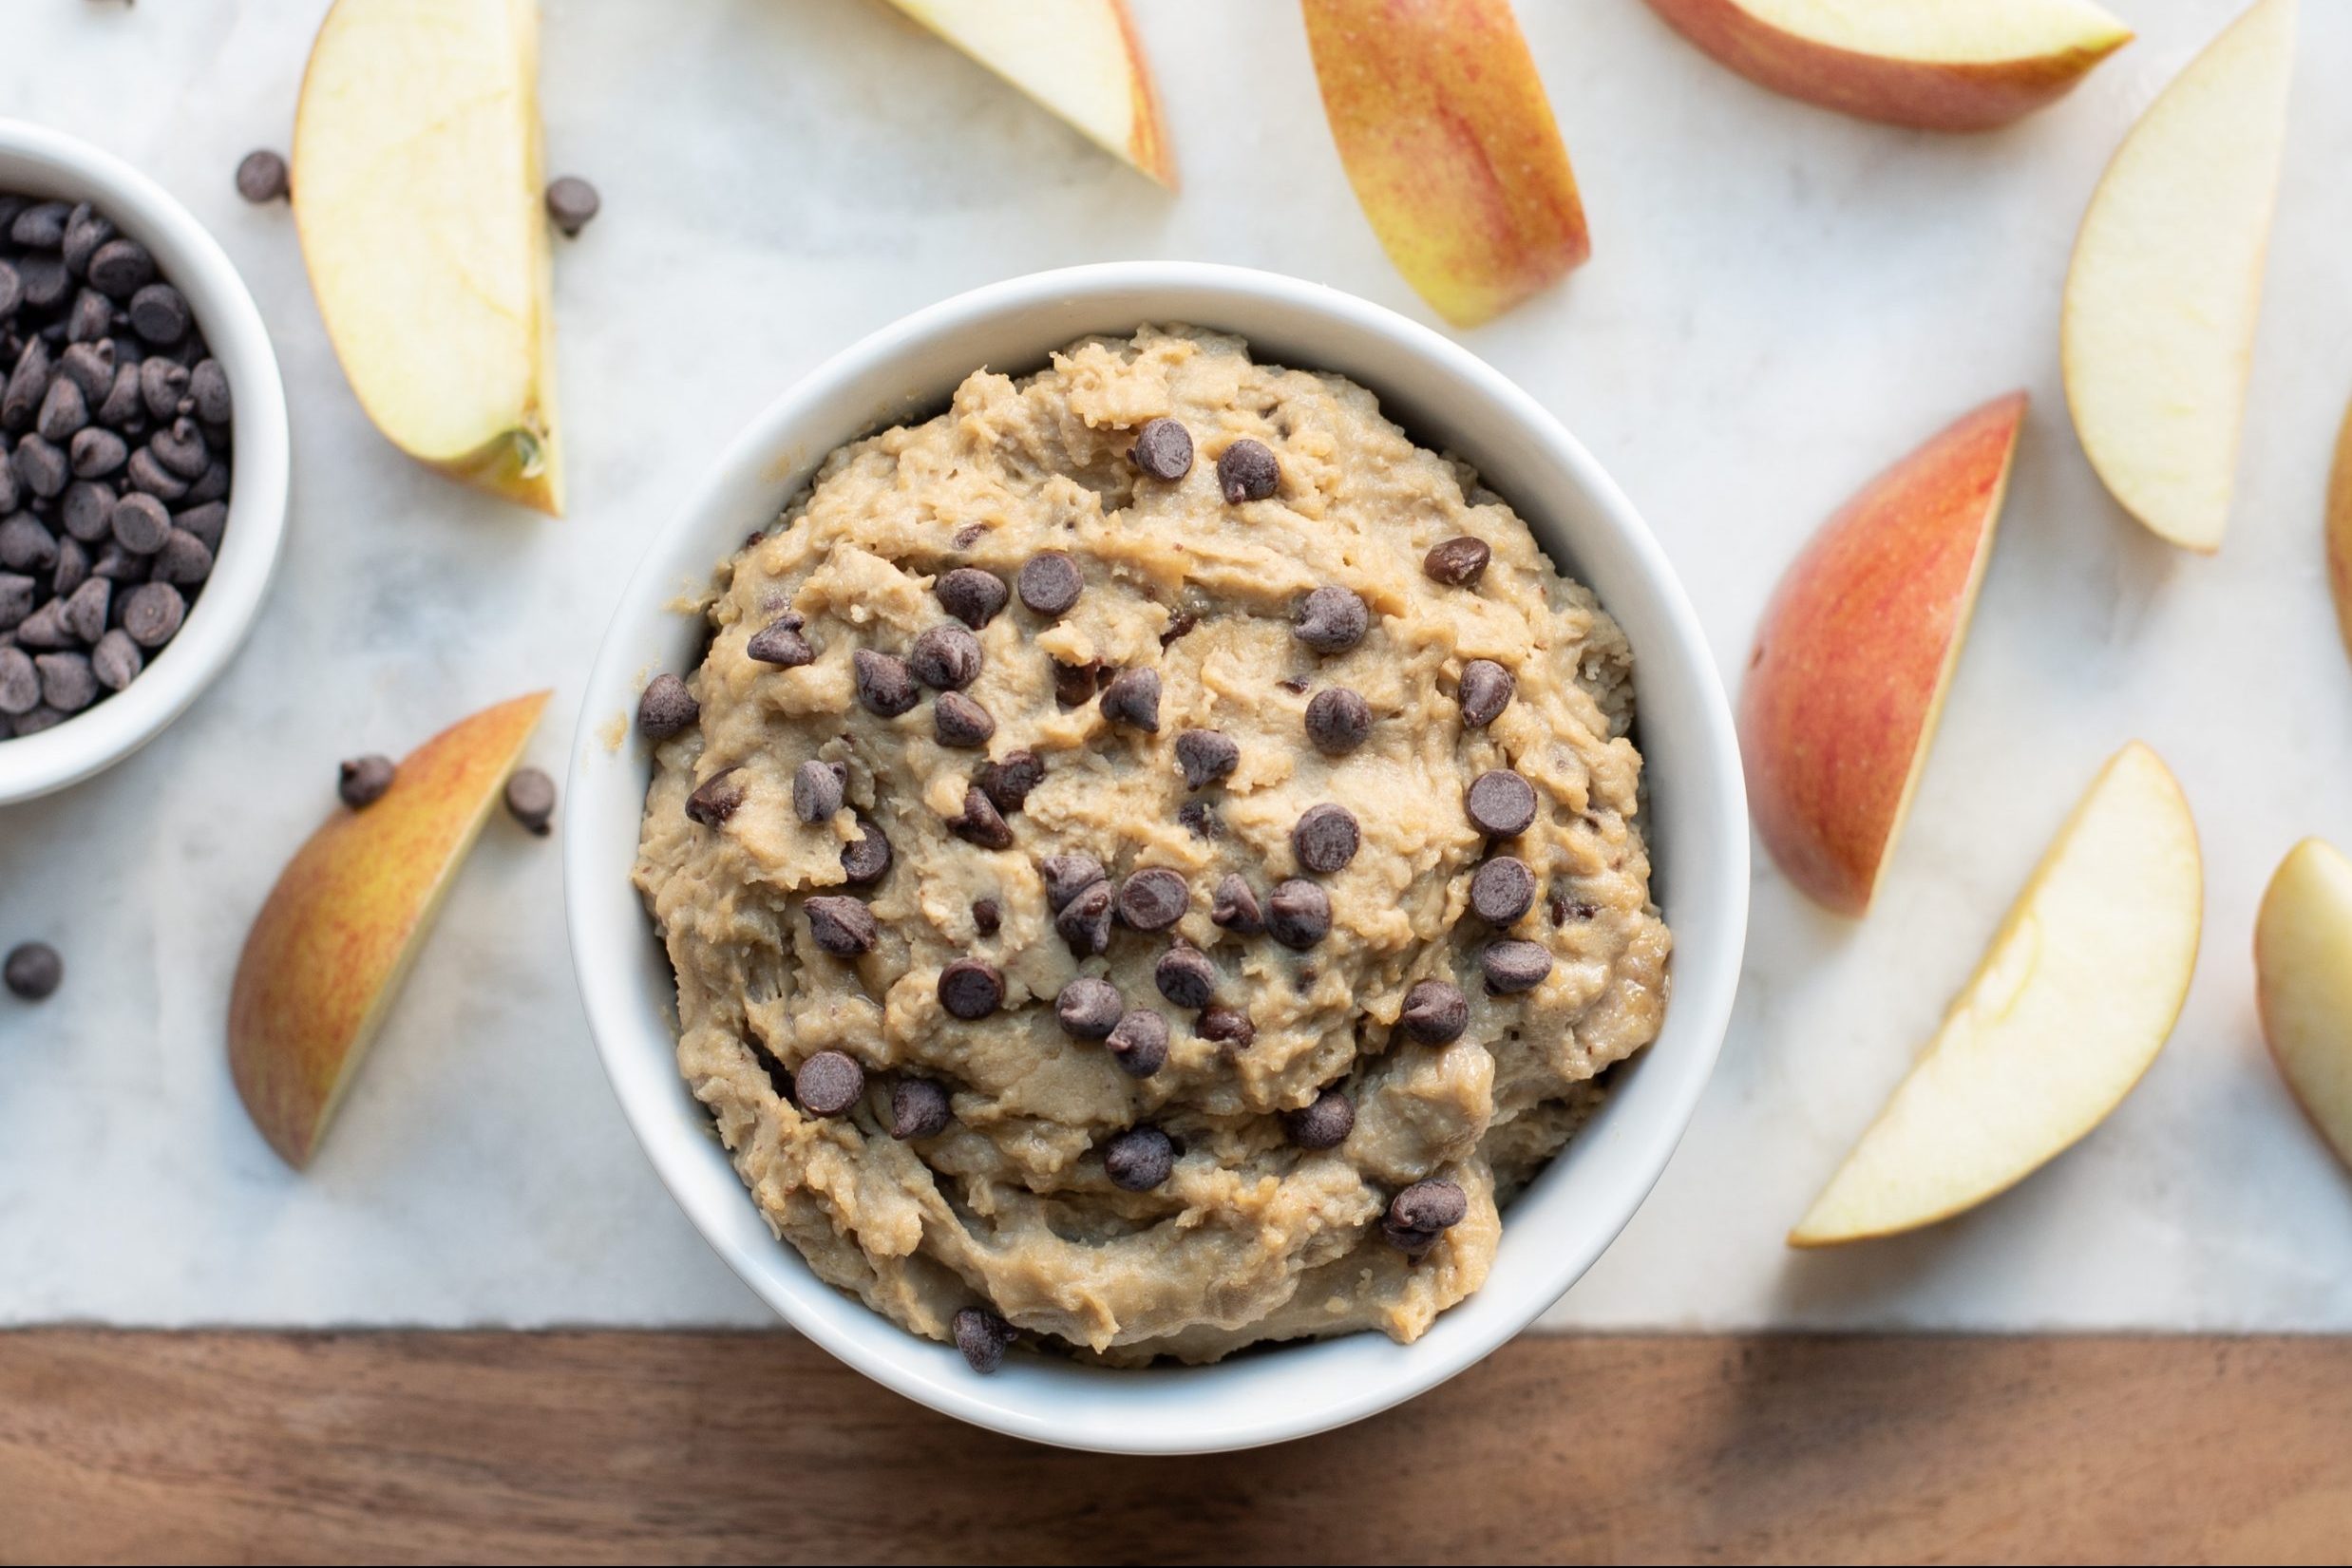 A Chickpea Cookie Dough Recipe This Nutritionist Loves